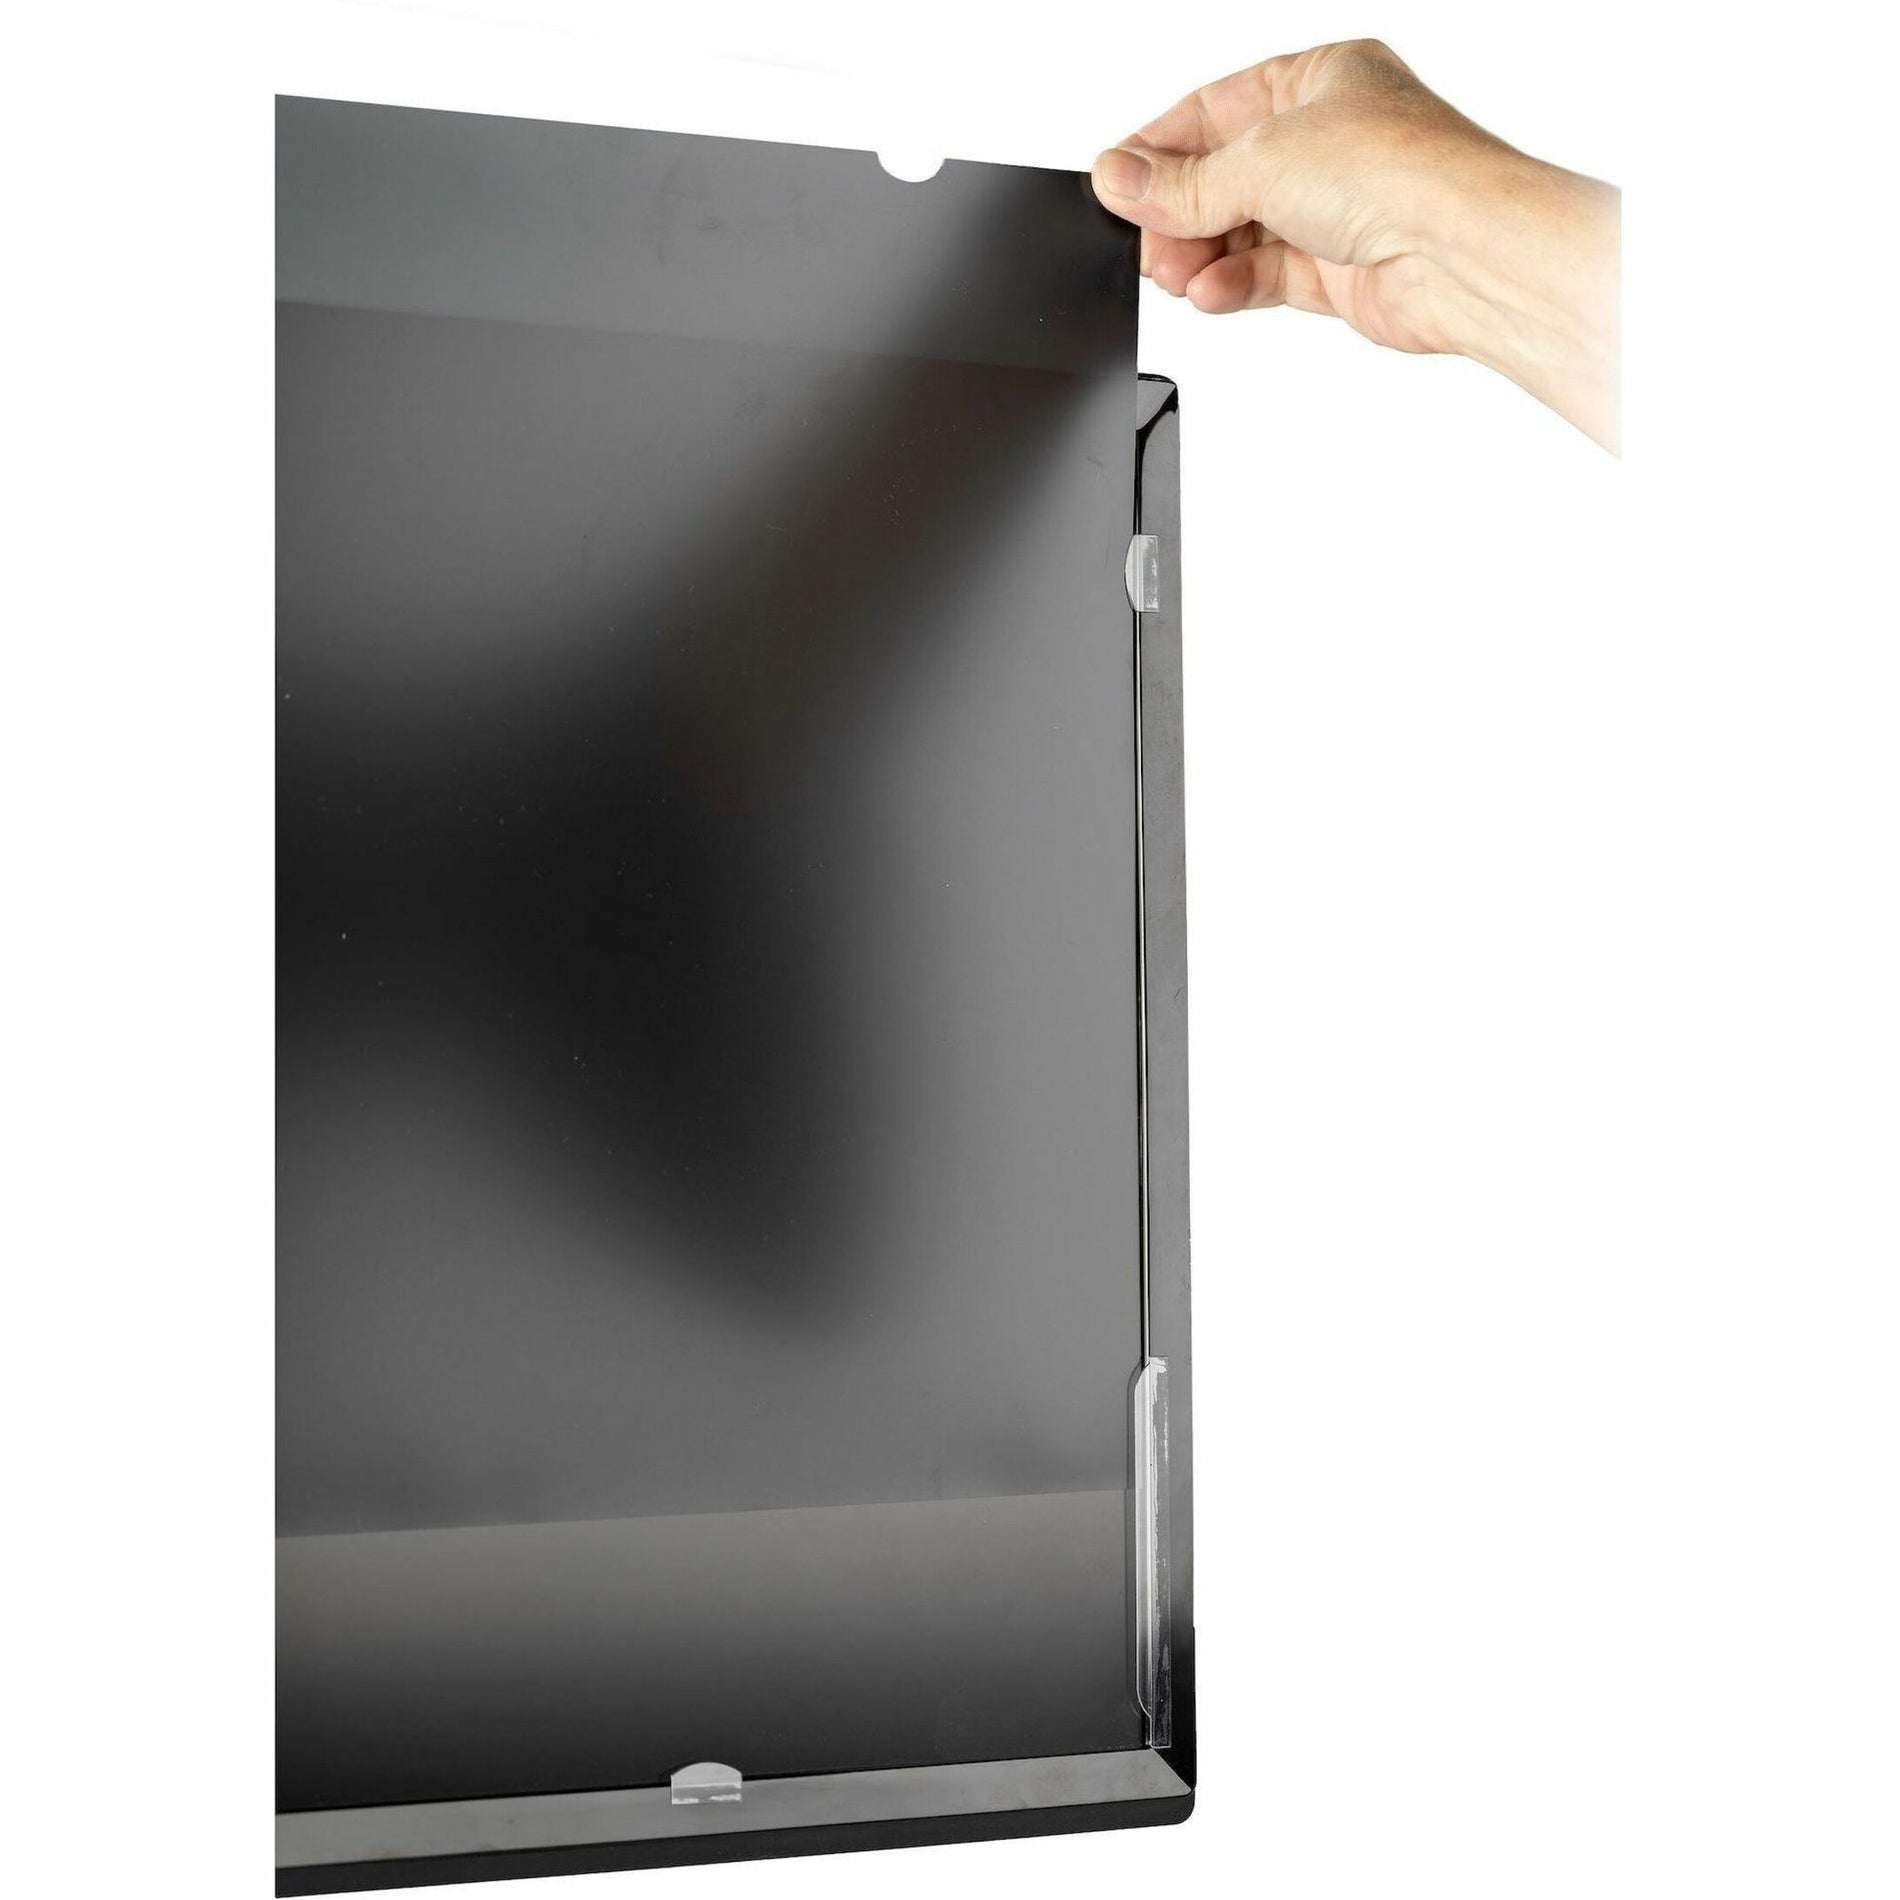 StarTech.com 2269-PRIVACY-SCREEN Privacy Screen Filter, Blue Light Reduction, Reversible, Residue-free, Anti-glare, 16:9, 22" LCD Monitor